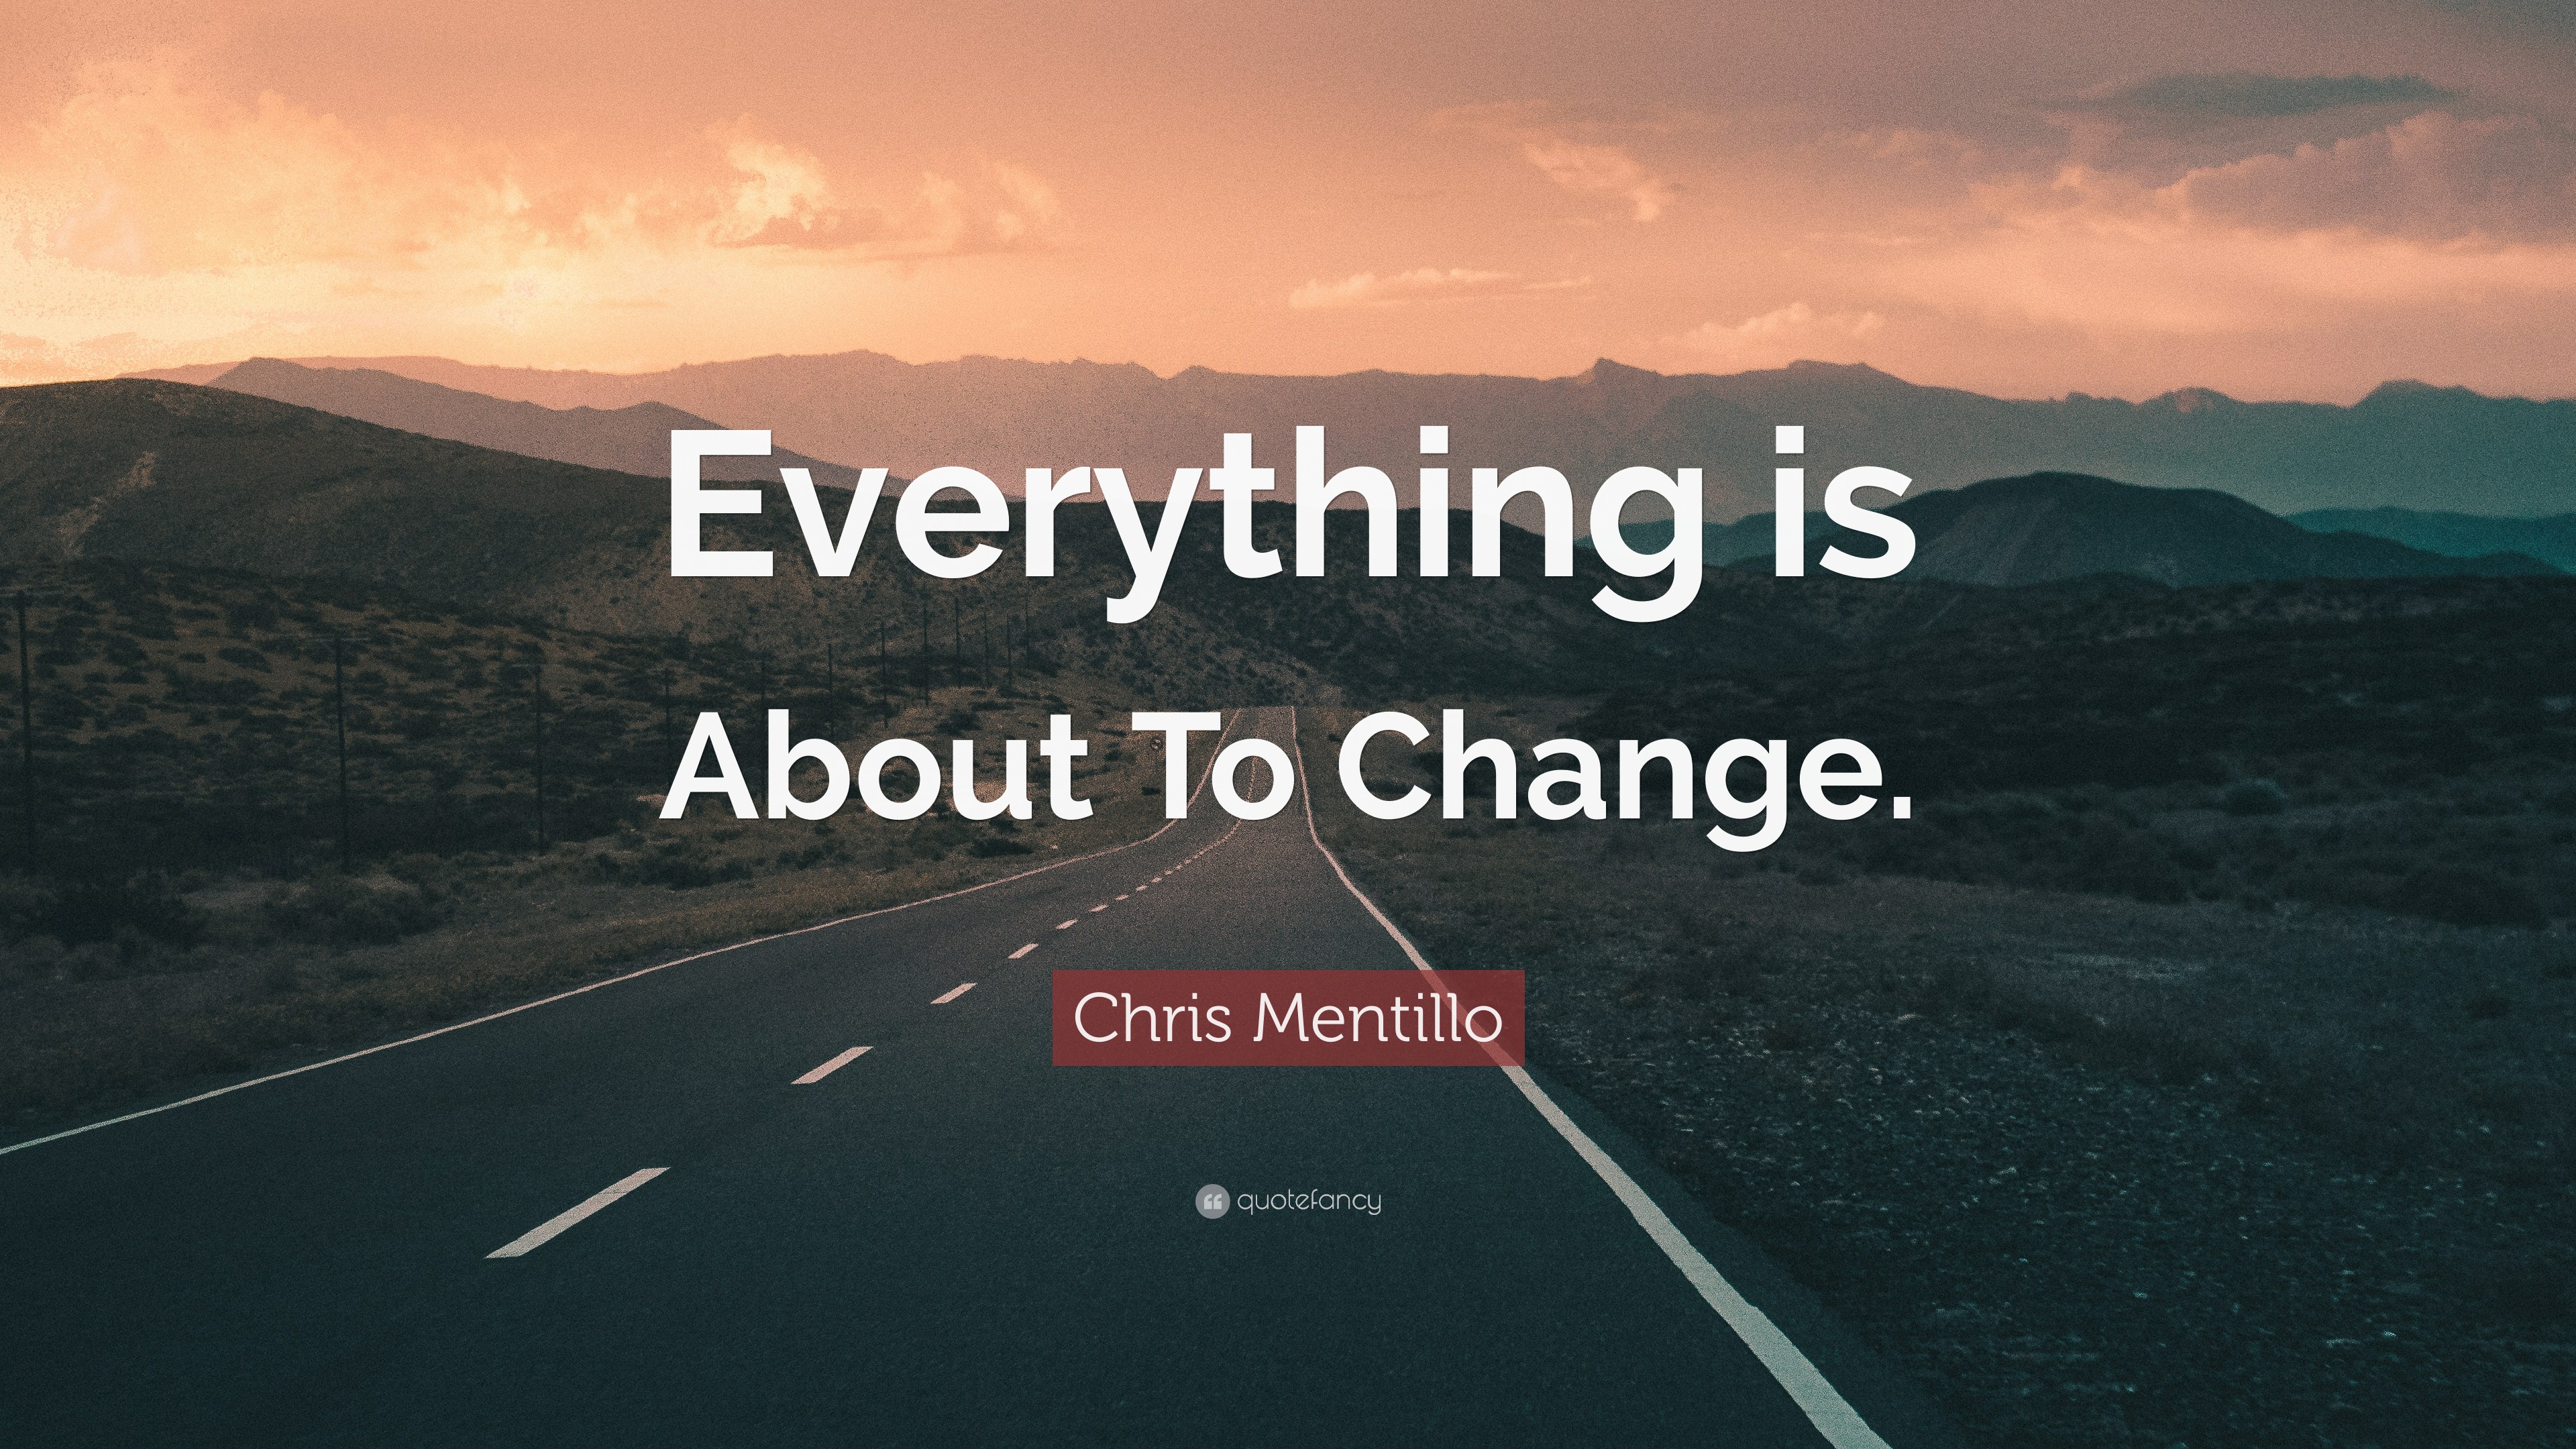 Chris Mentillo Quote: “Everything is About To Change.”